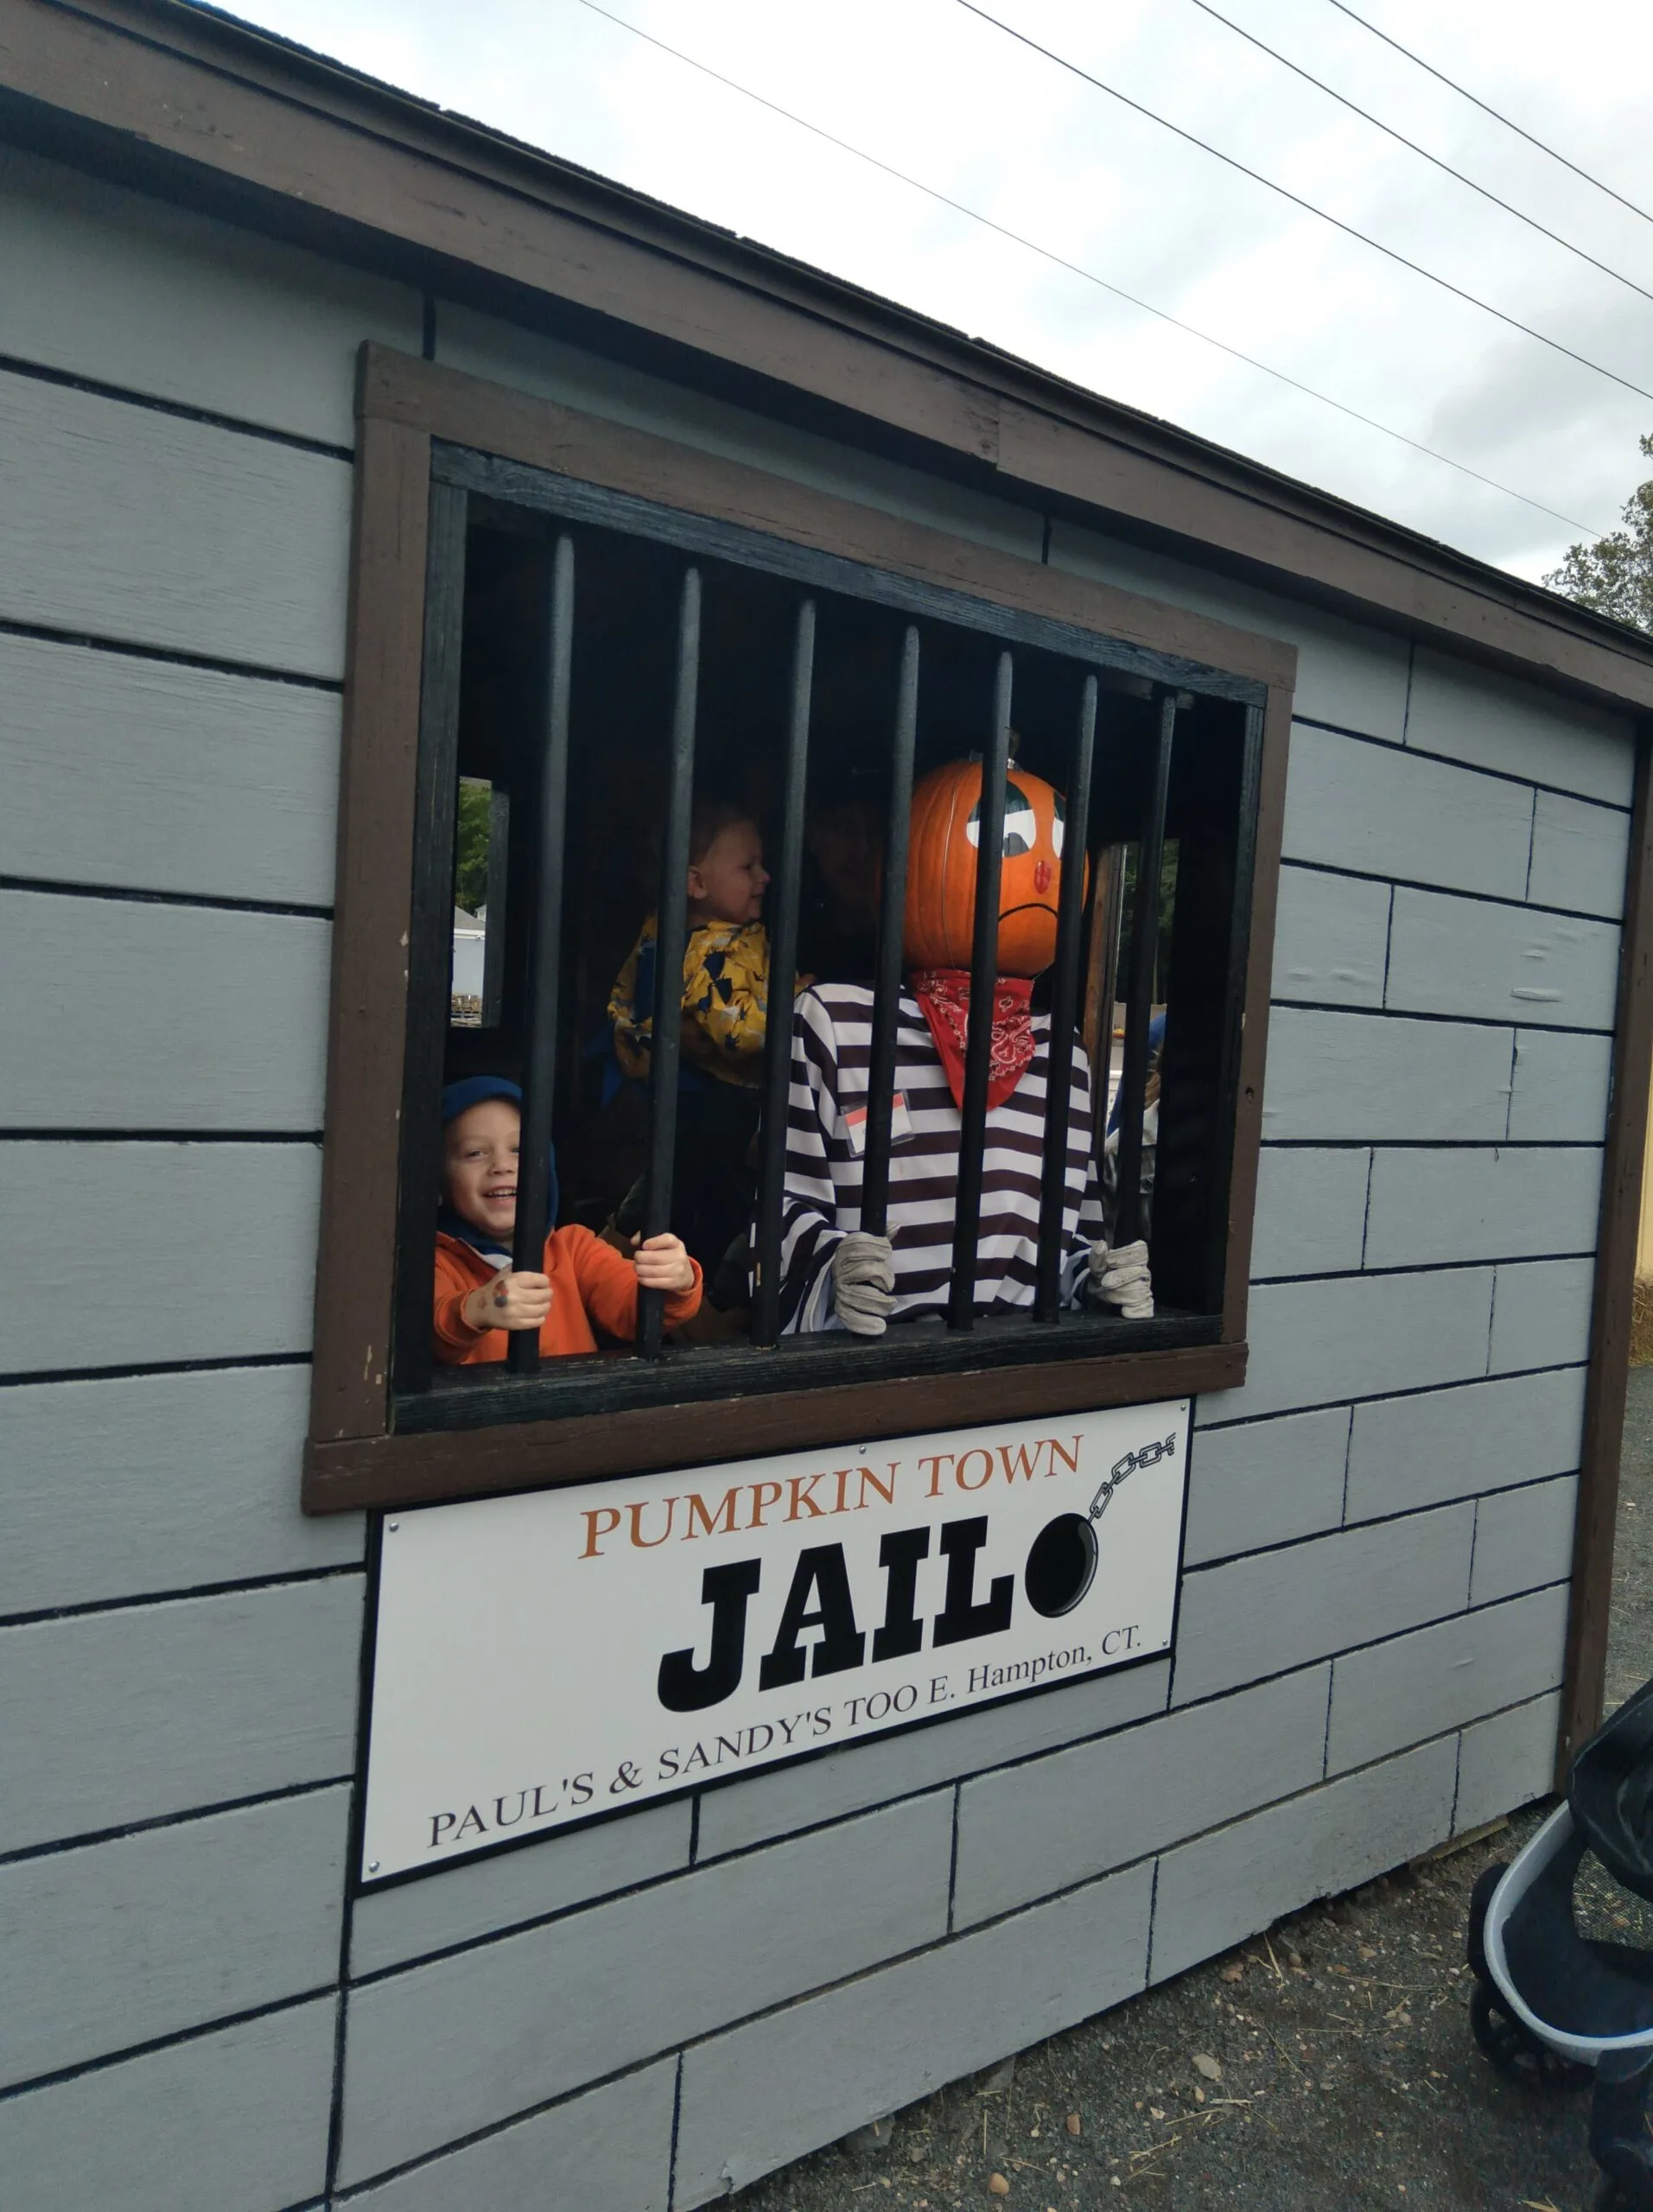 Image of child in pretend jail at pumpkintown usa in east hampton ct.